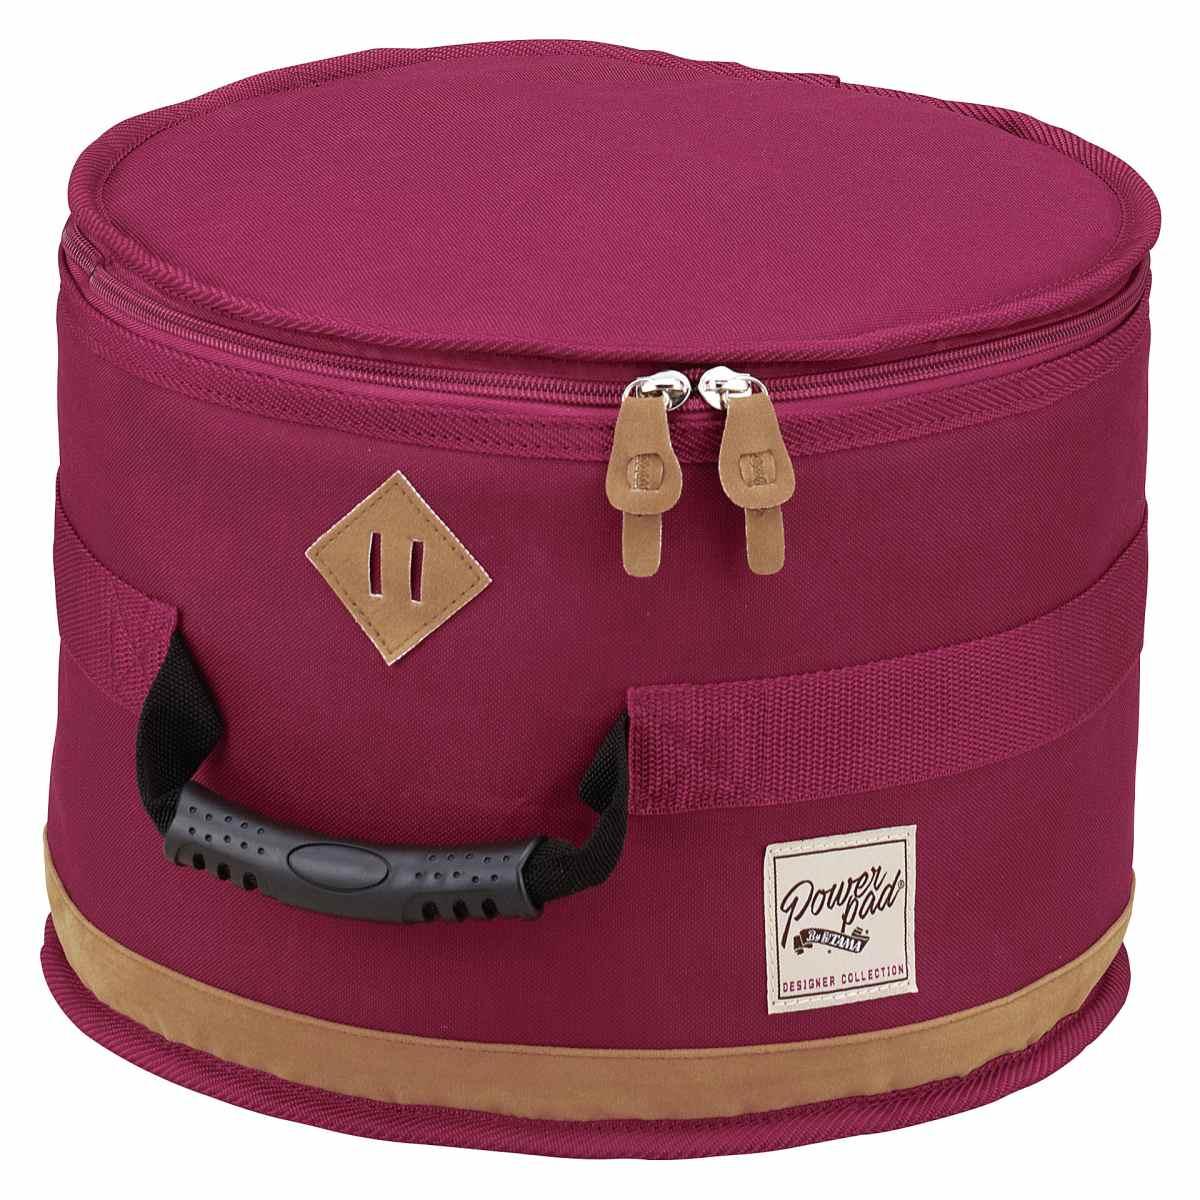 TAMA TSBF14WR Power Pad Designer Collection Drum Bag for 14"x14" Floor Tom, Wine Red